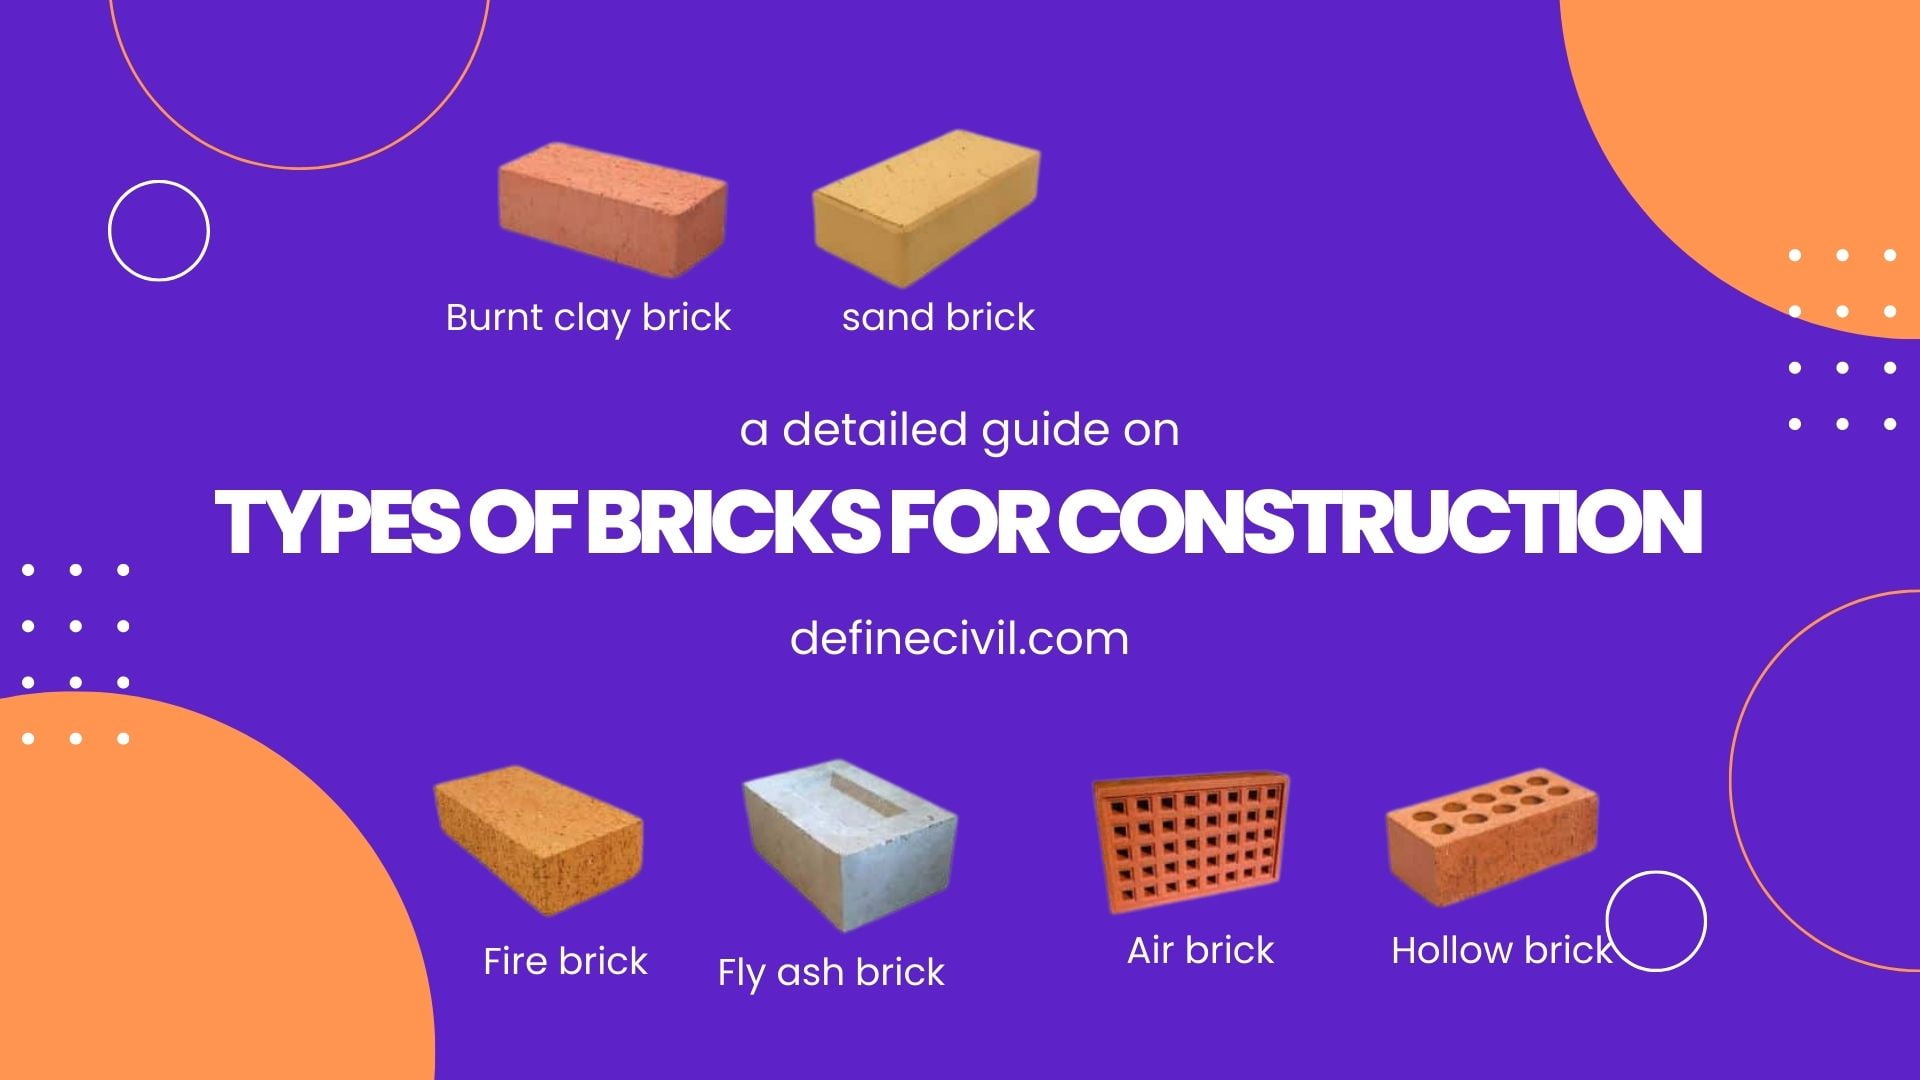 TYPES OF BRICKS FOR CONSTRUCTION